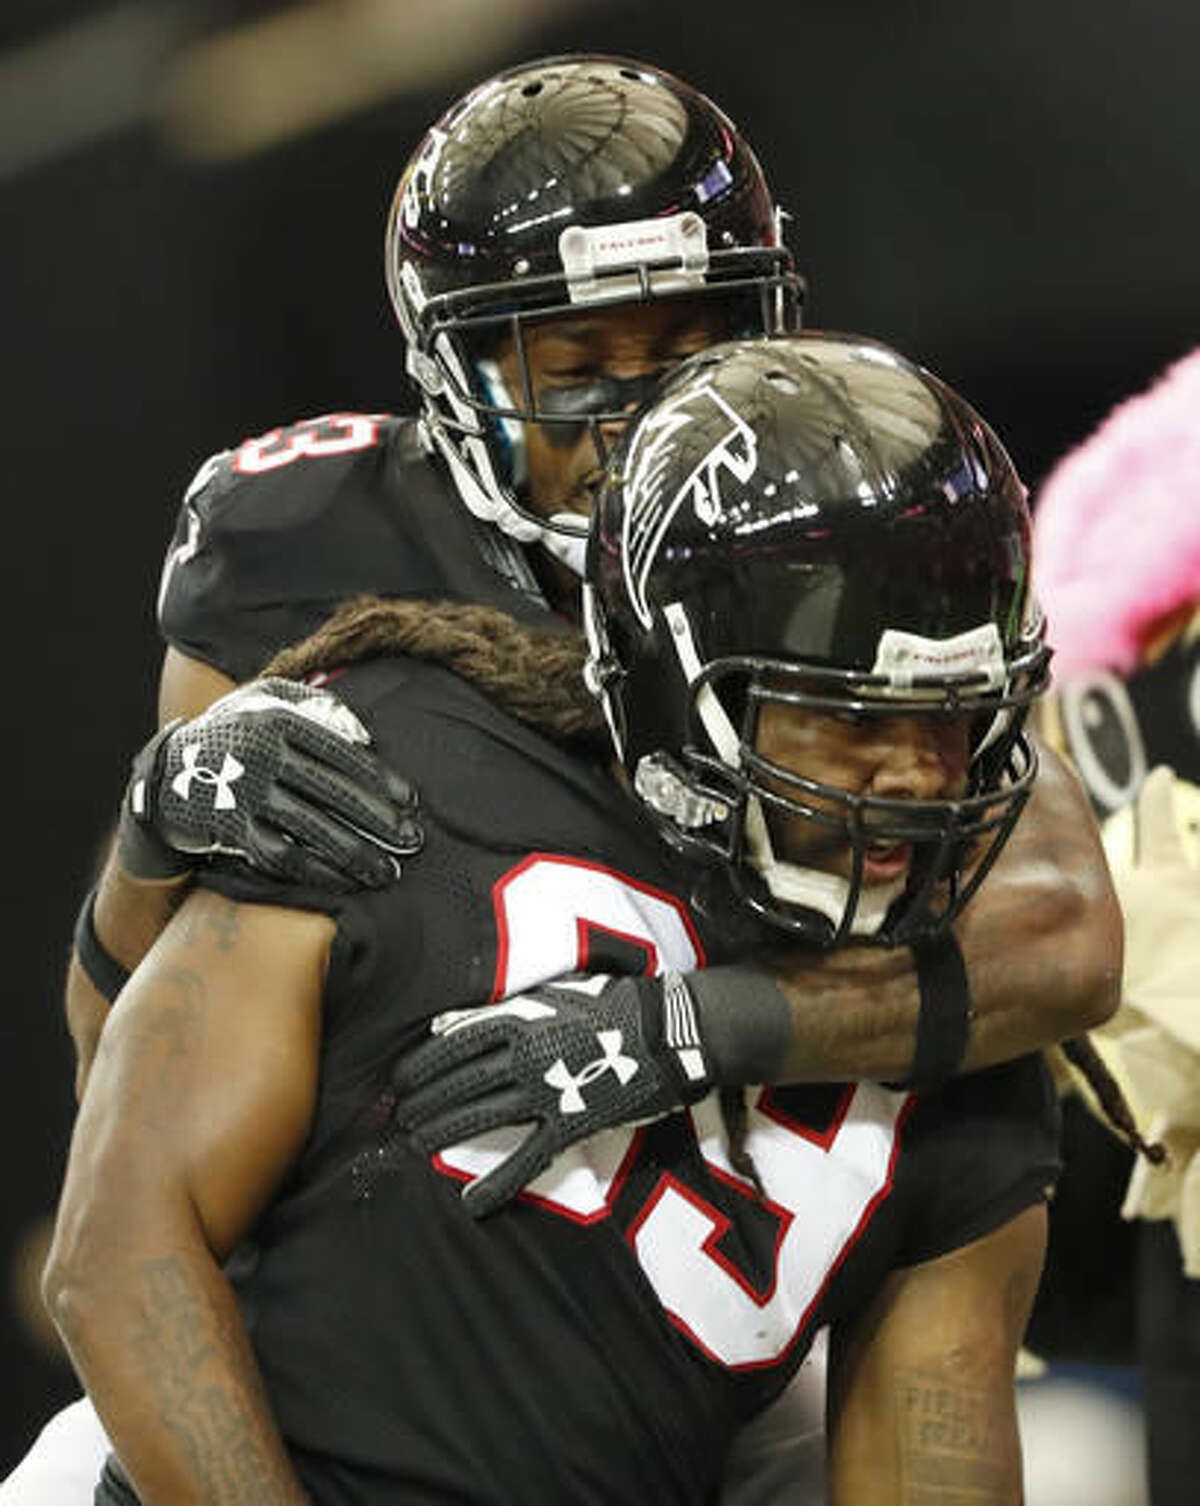 Atlanta Falcons defensive end Adrian Clayborn (99) celebrates with team mates after he picked up a fumble and ran into the end zone for a touchdpown against the San Diego Chargers during the first half of an NFL football game, Sunday, Oct. 23, 2016, in Atlanta. (AP Photo/John Bazemore)